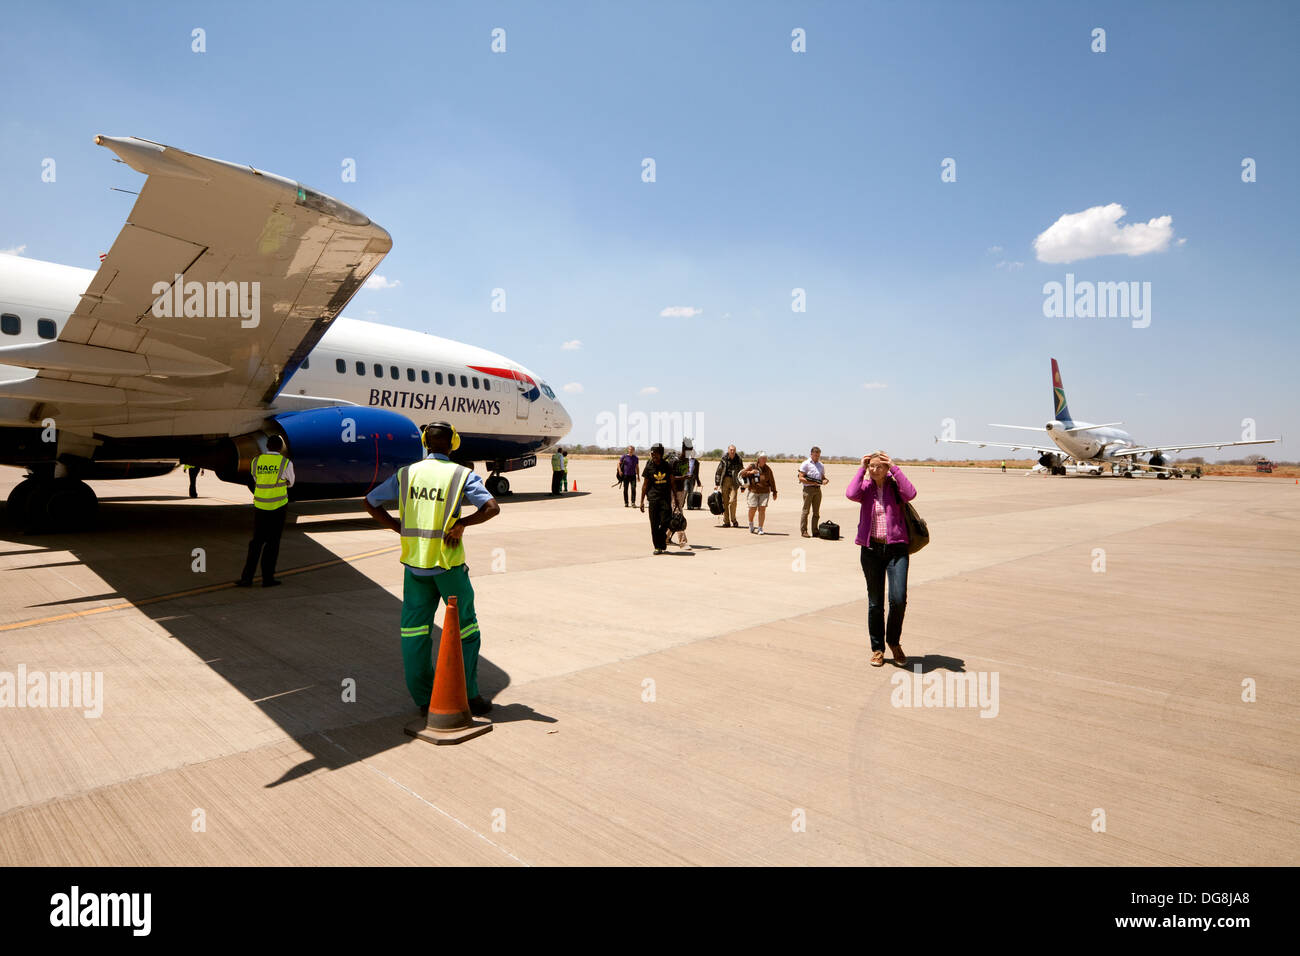 People disembarking from a British Airways Boeing 737 on the tarmac at Livingstone airport, Zambia, Africa Stock Photo